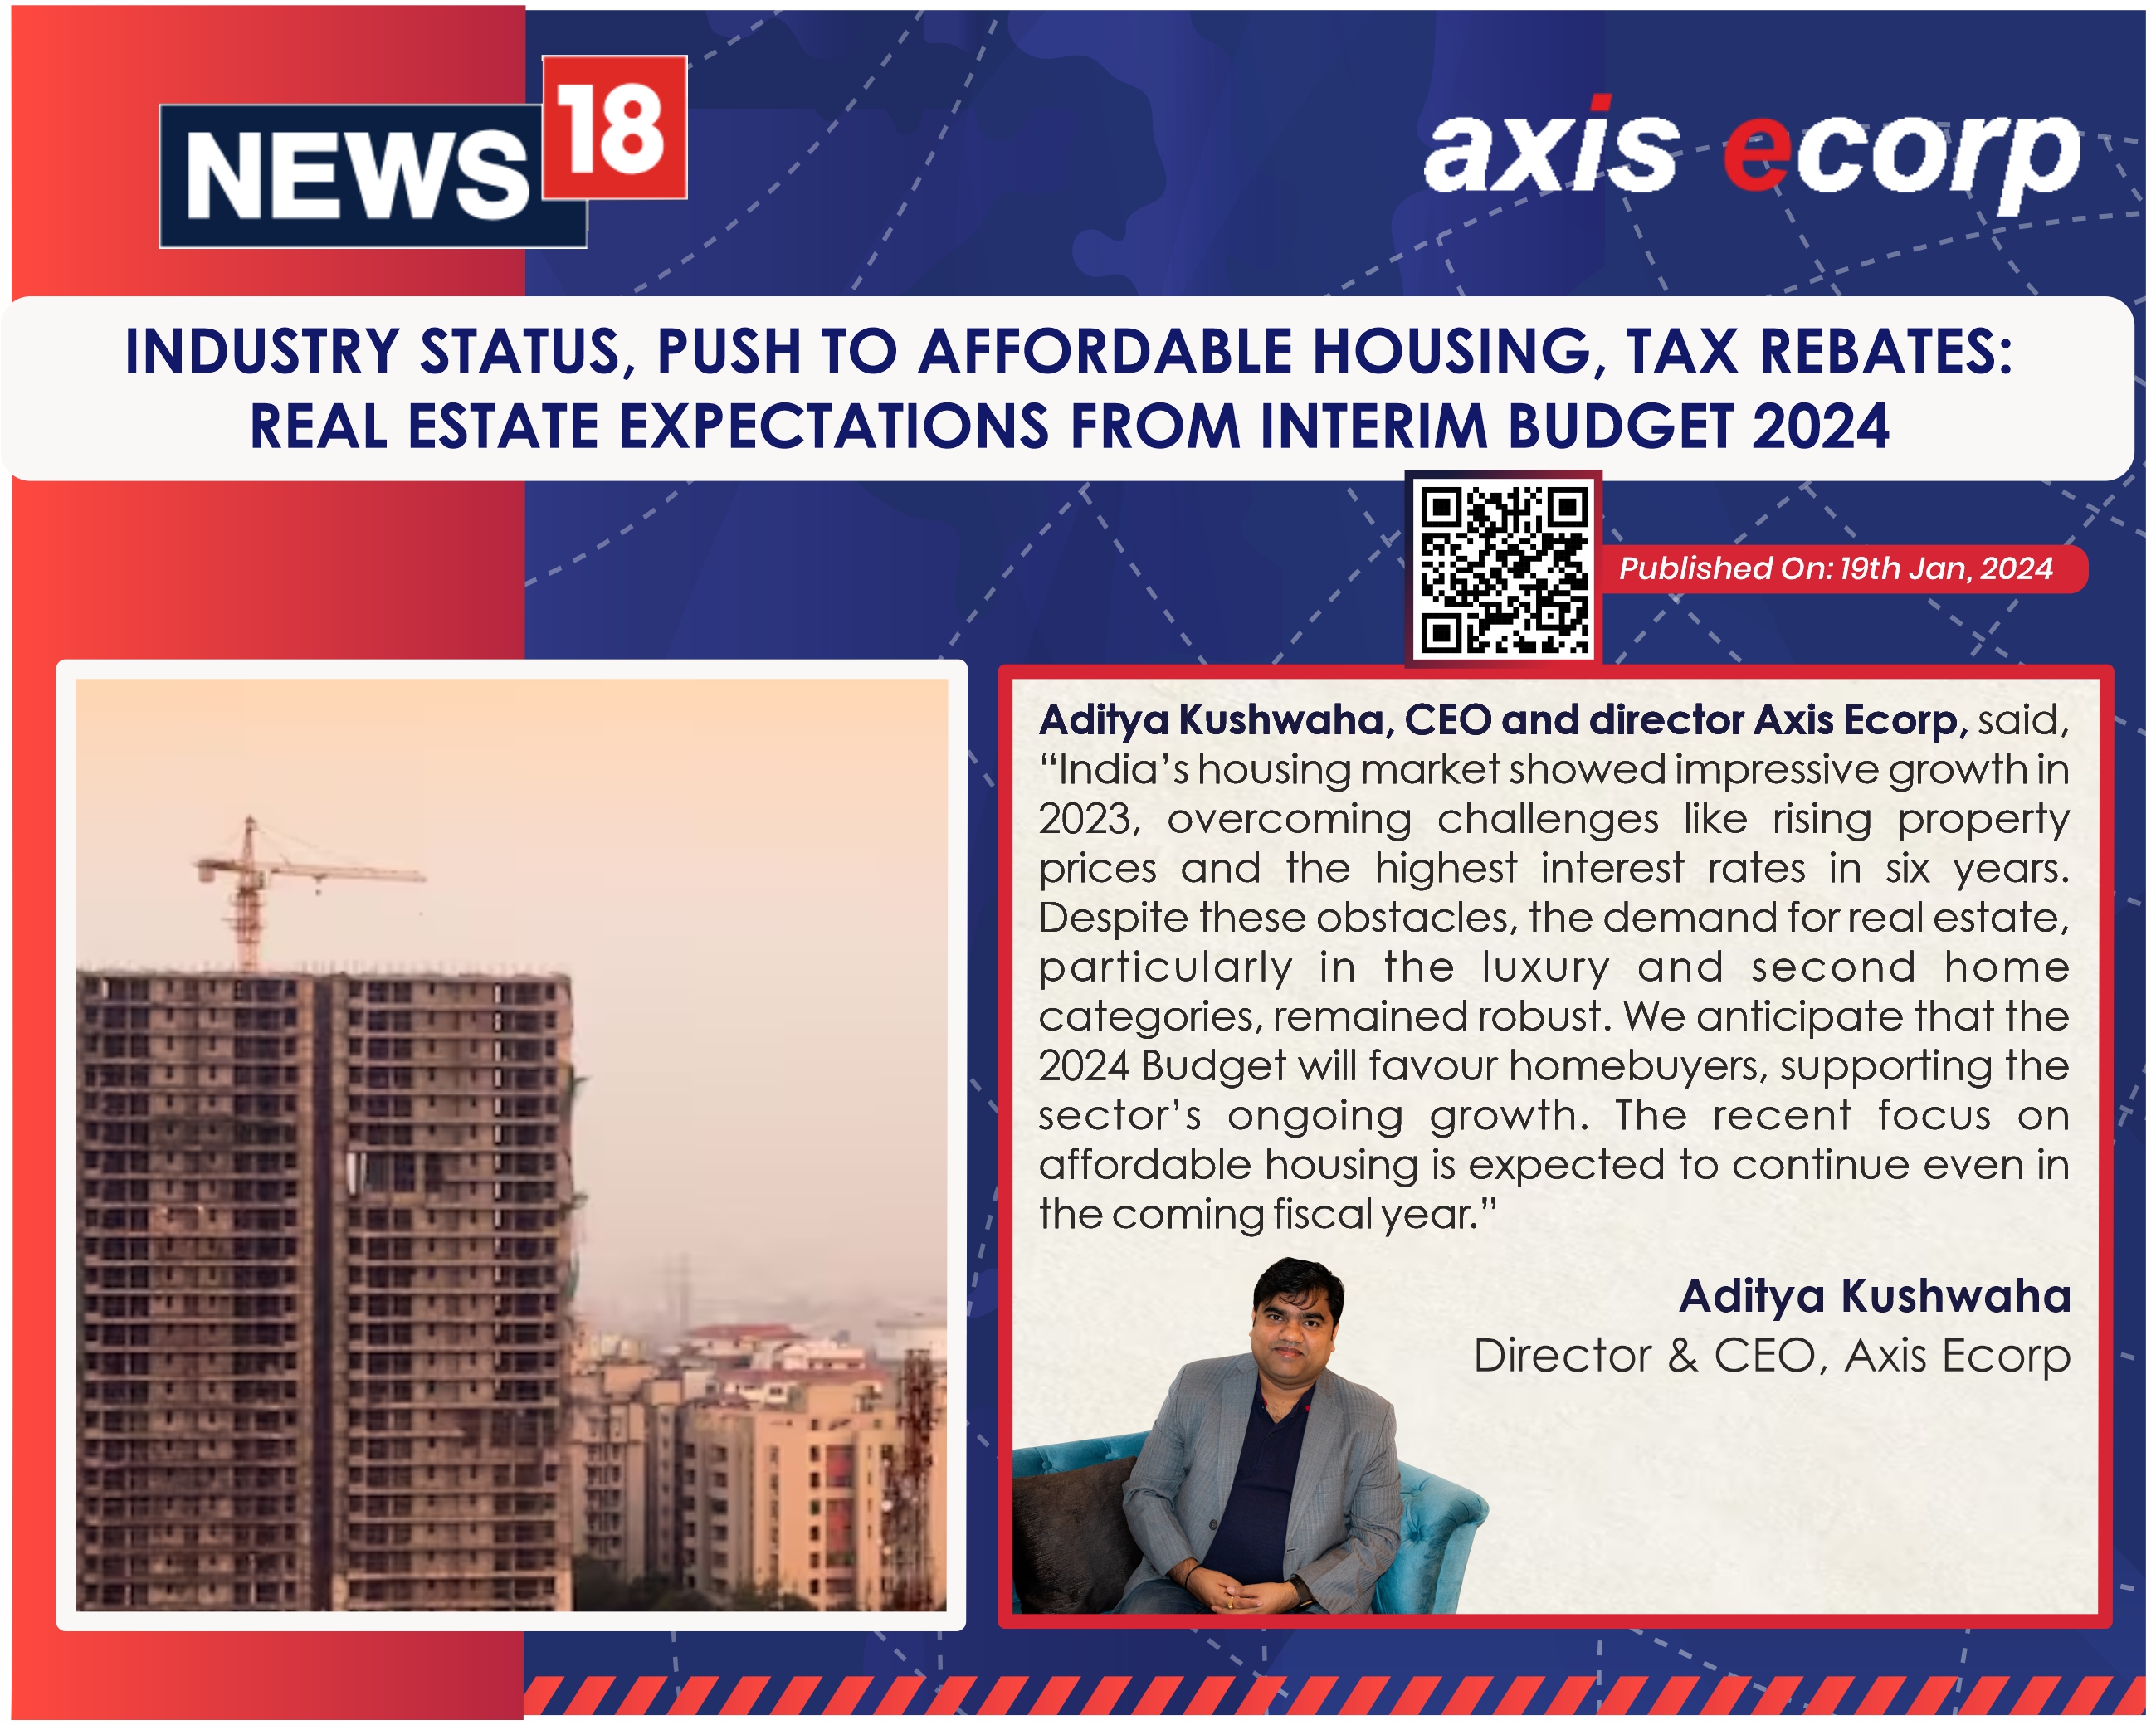 Real Estate Expectations From Interim Budget 2024